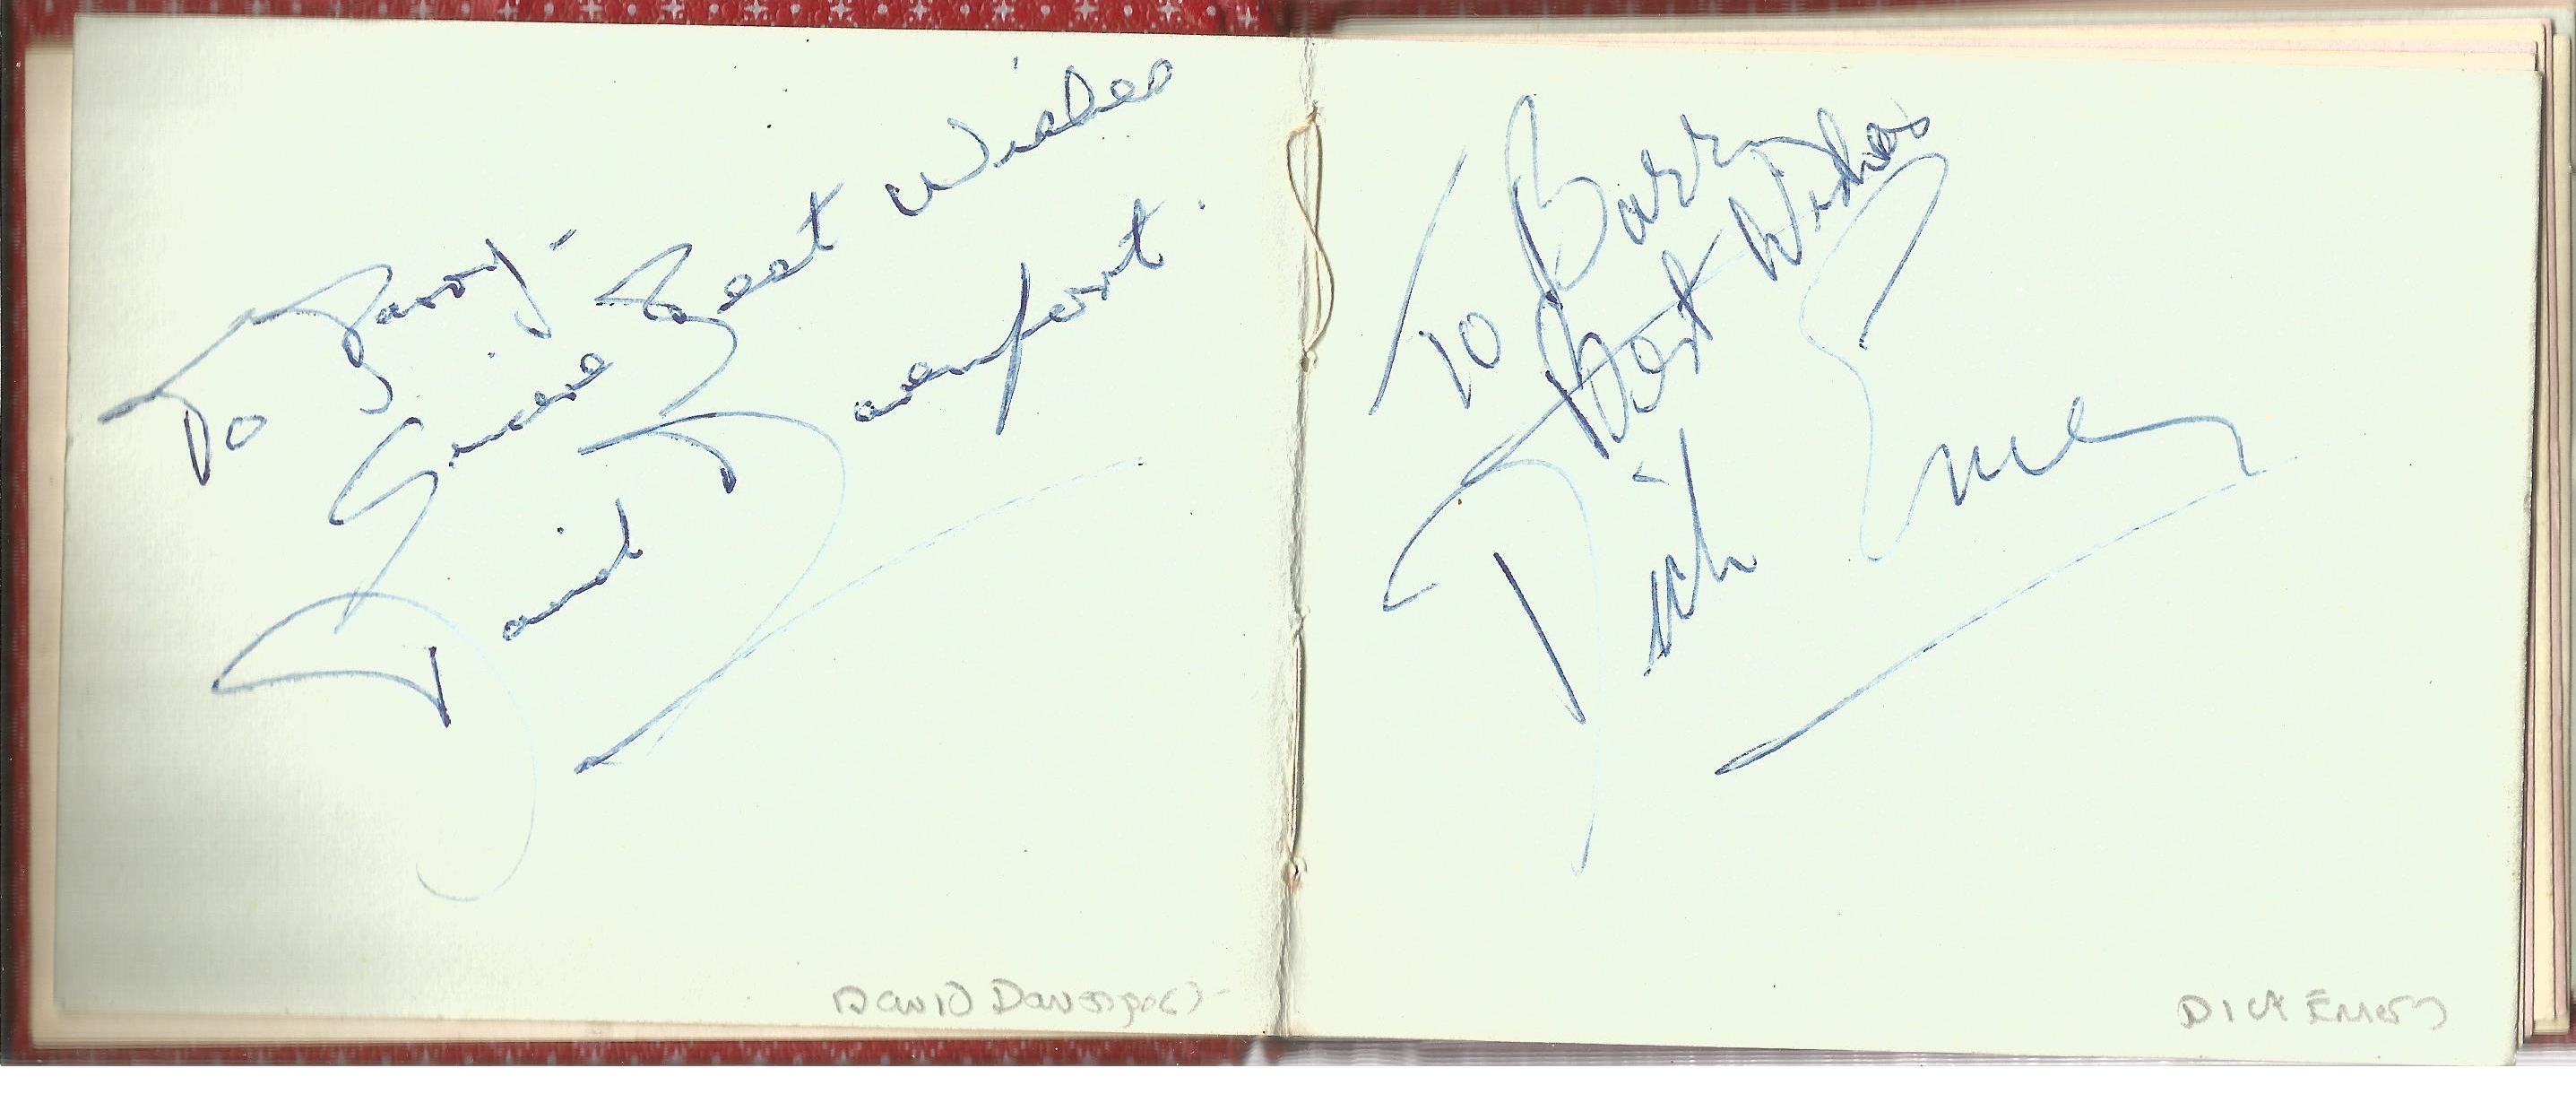 1960s Film Music Entertainment autograph book. Some of names included are David Davenport, Dick